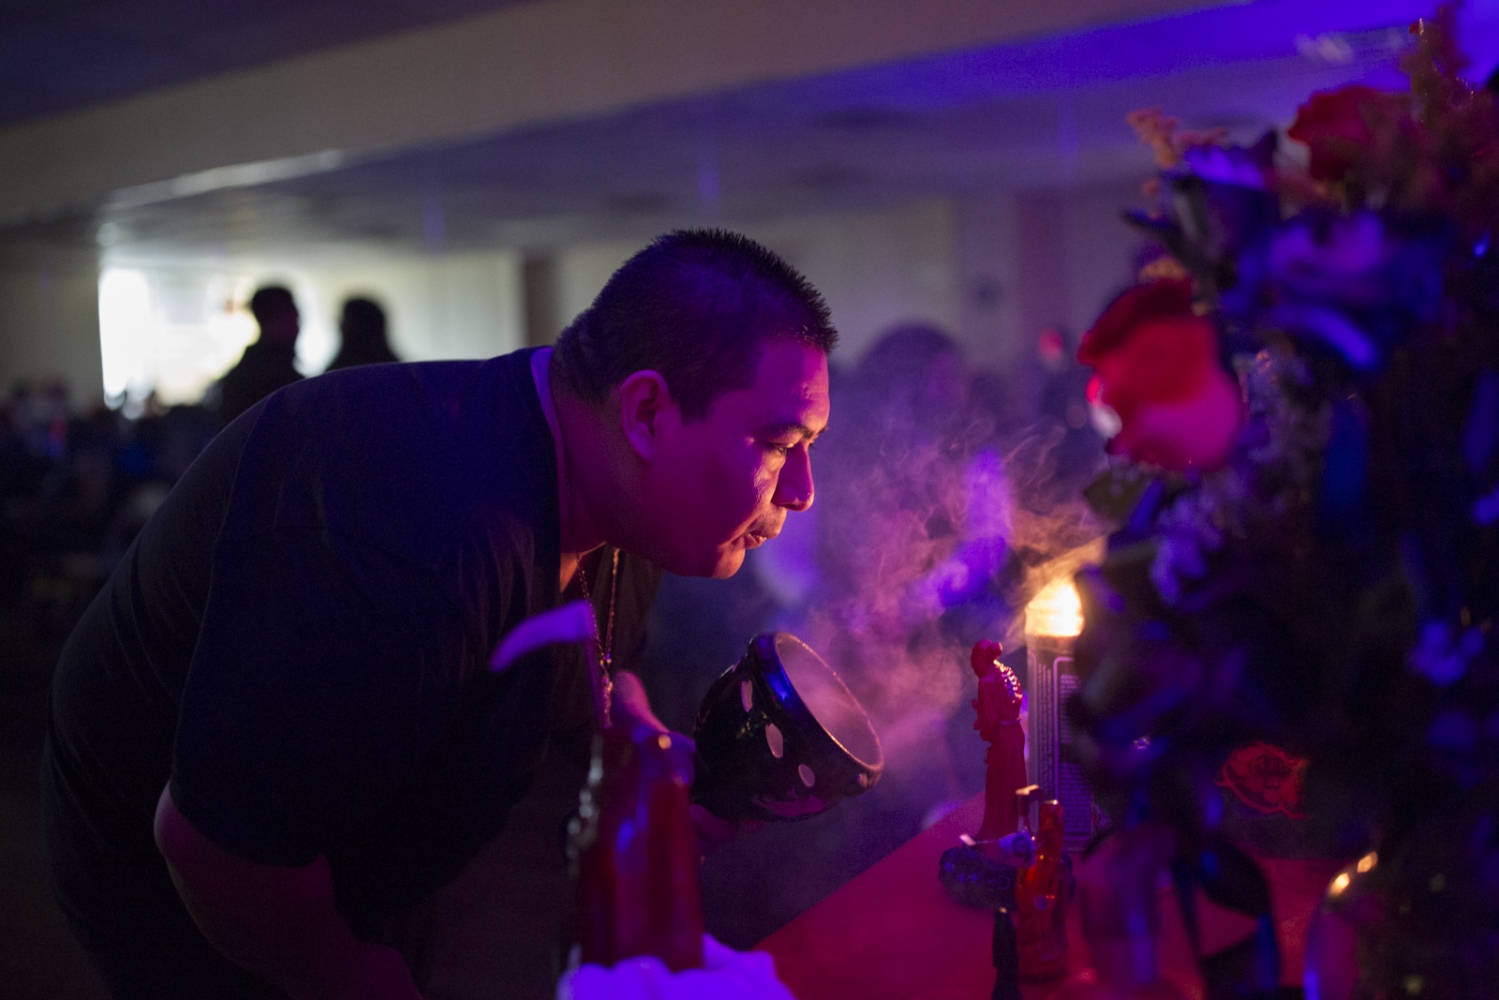 Pasitas Lopez, leader and owner of a botanica dedicated to Santa Muerte, performs a ritual during...